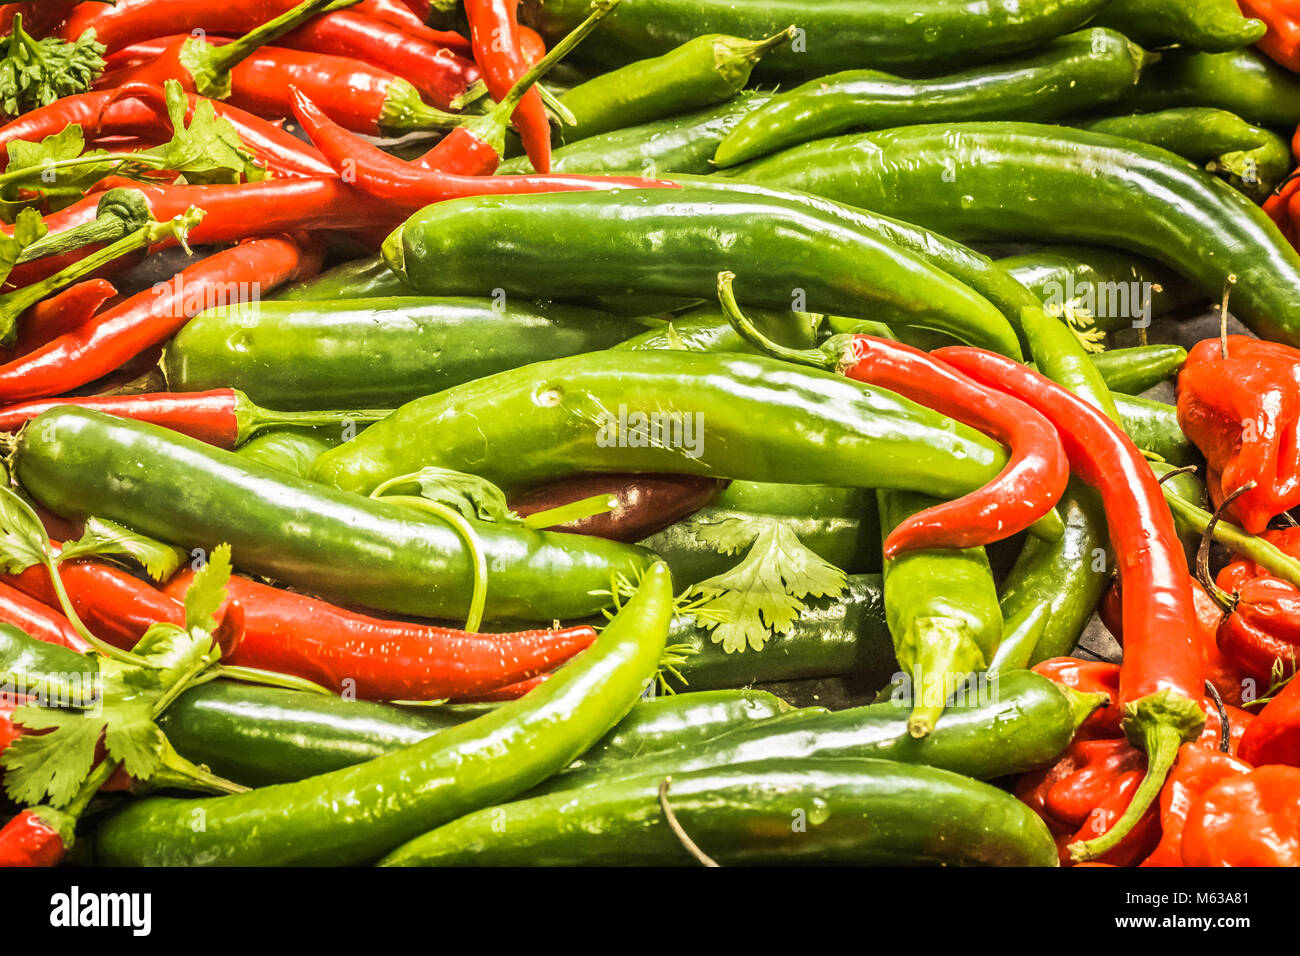 Mixed red and green chilli peppers at Borough market, London UK Stock Photo